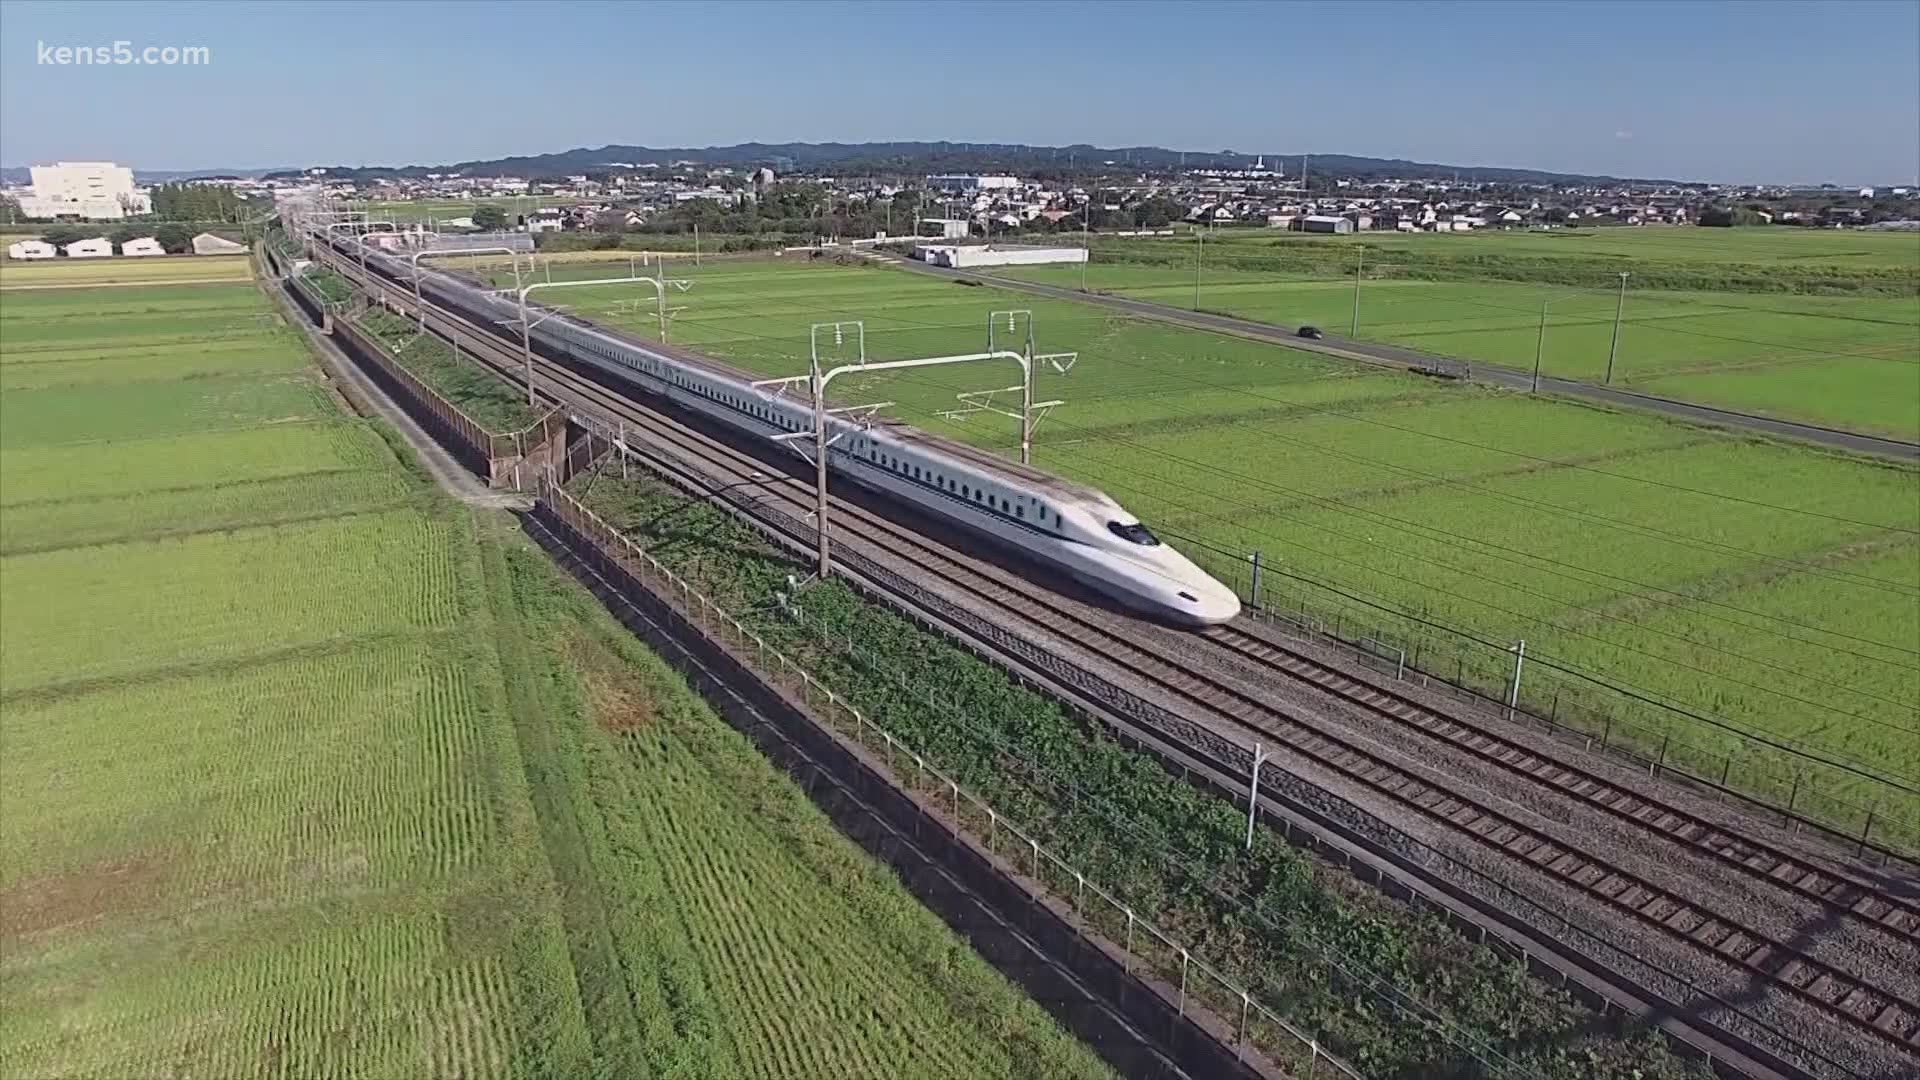 The Federal Railroad Administration gave its final approval for a bullet train between Dallas and Houston on Monday.